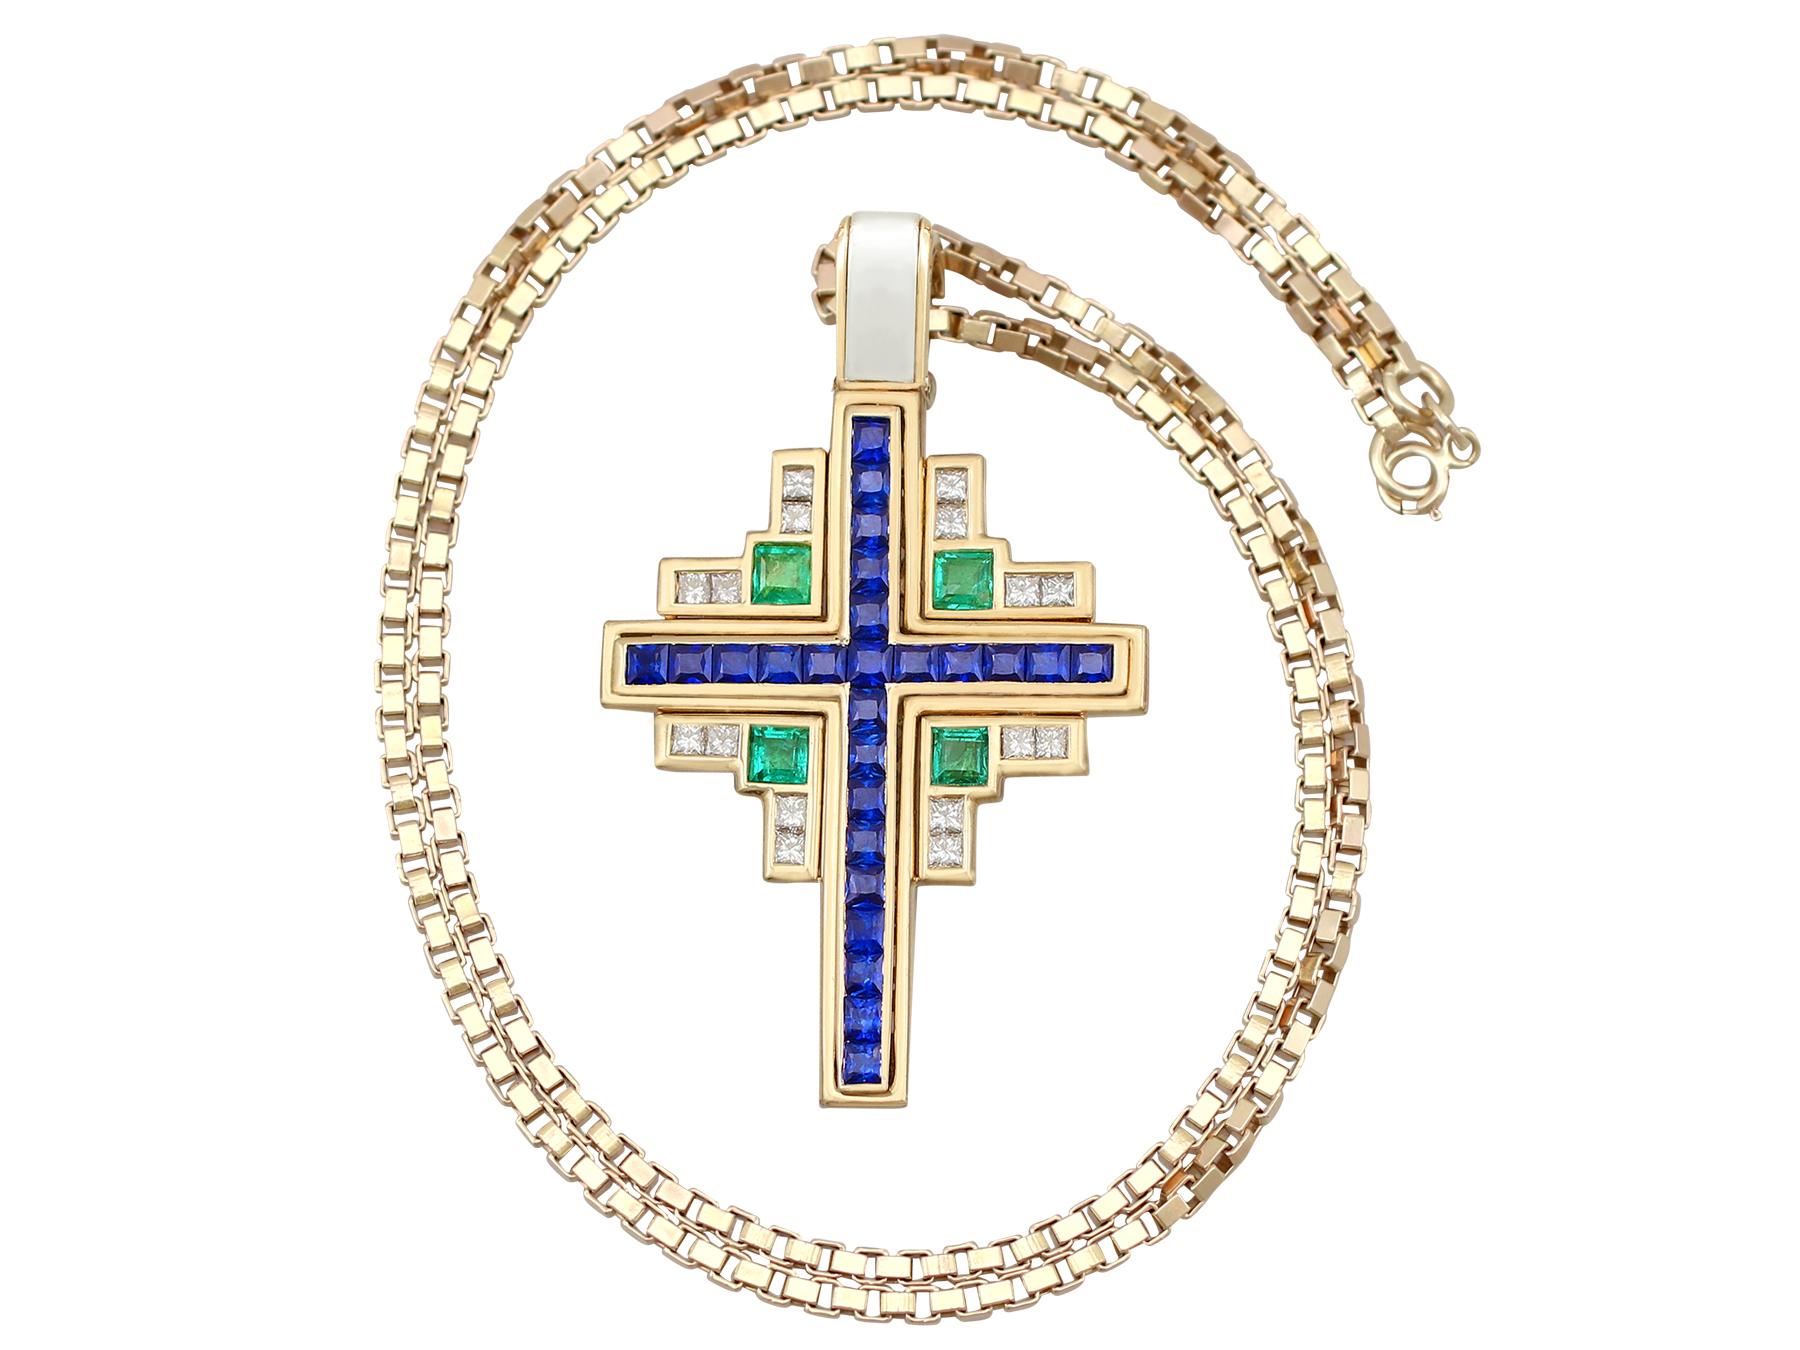 A stunning vintage 1.75 carat sapphire and 1 carat emerald, 0.96 carat diamond and 18 karat yellow gold cross pendant; part of our diverse gemstone jewelry and estate jewelry collections.

This stunning, fine and impressive pendant has been crafted